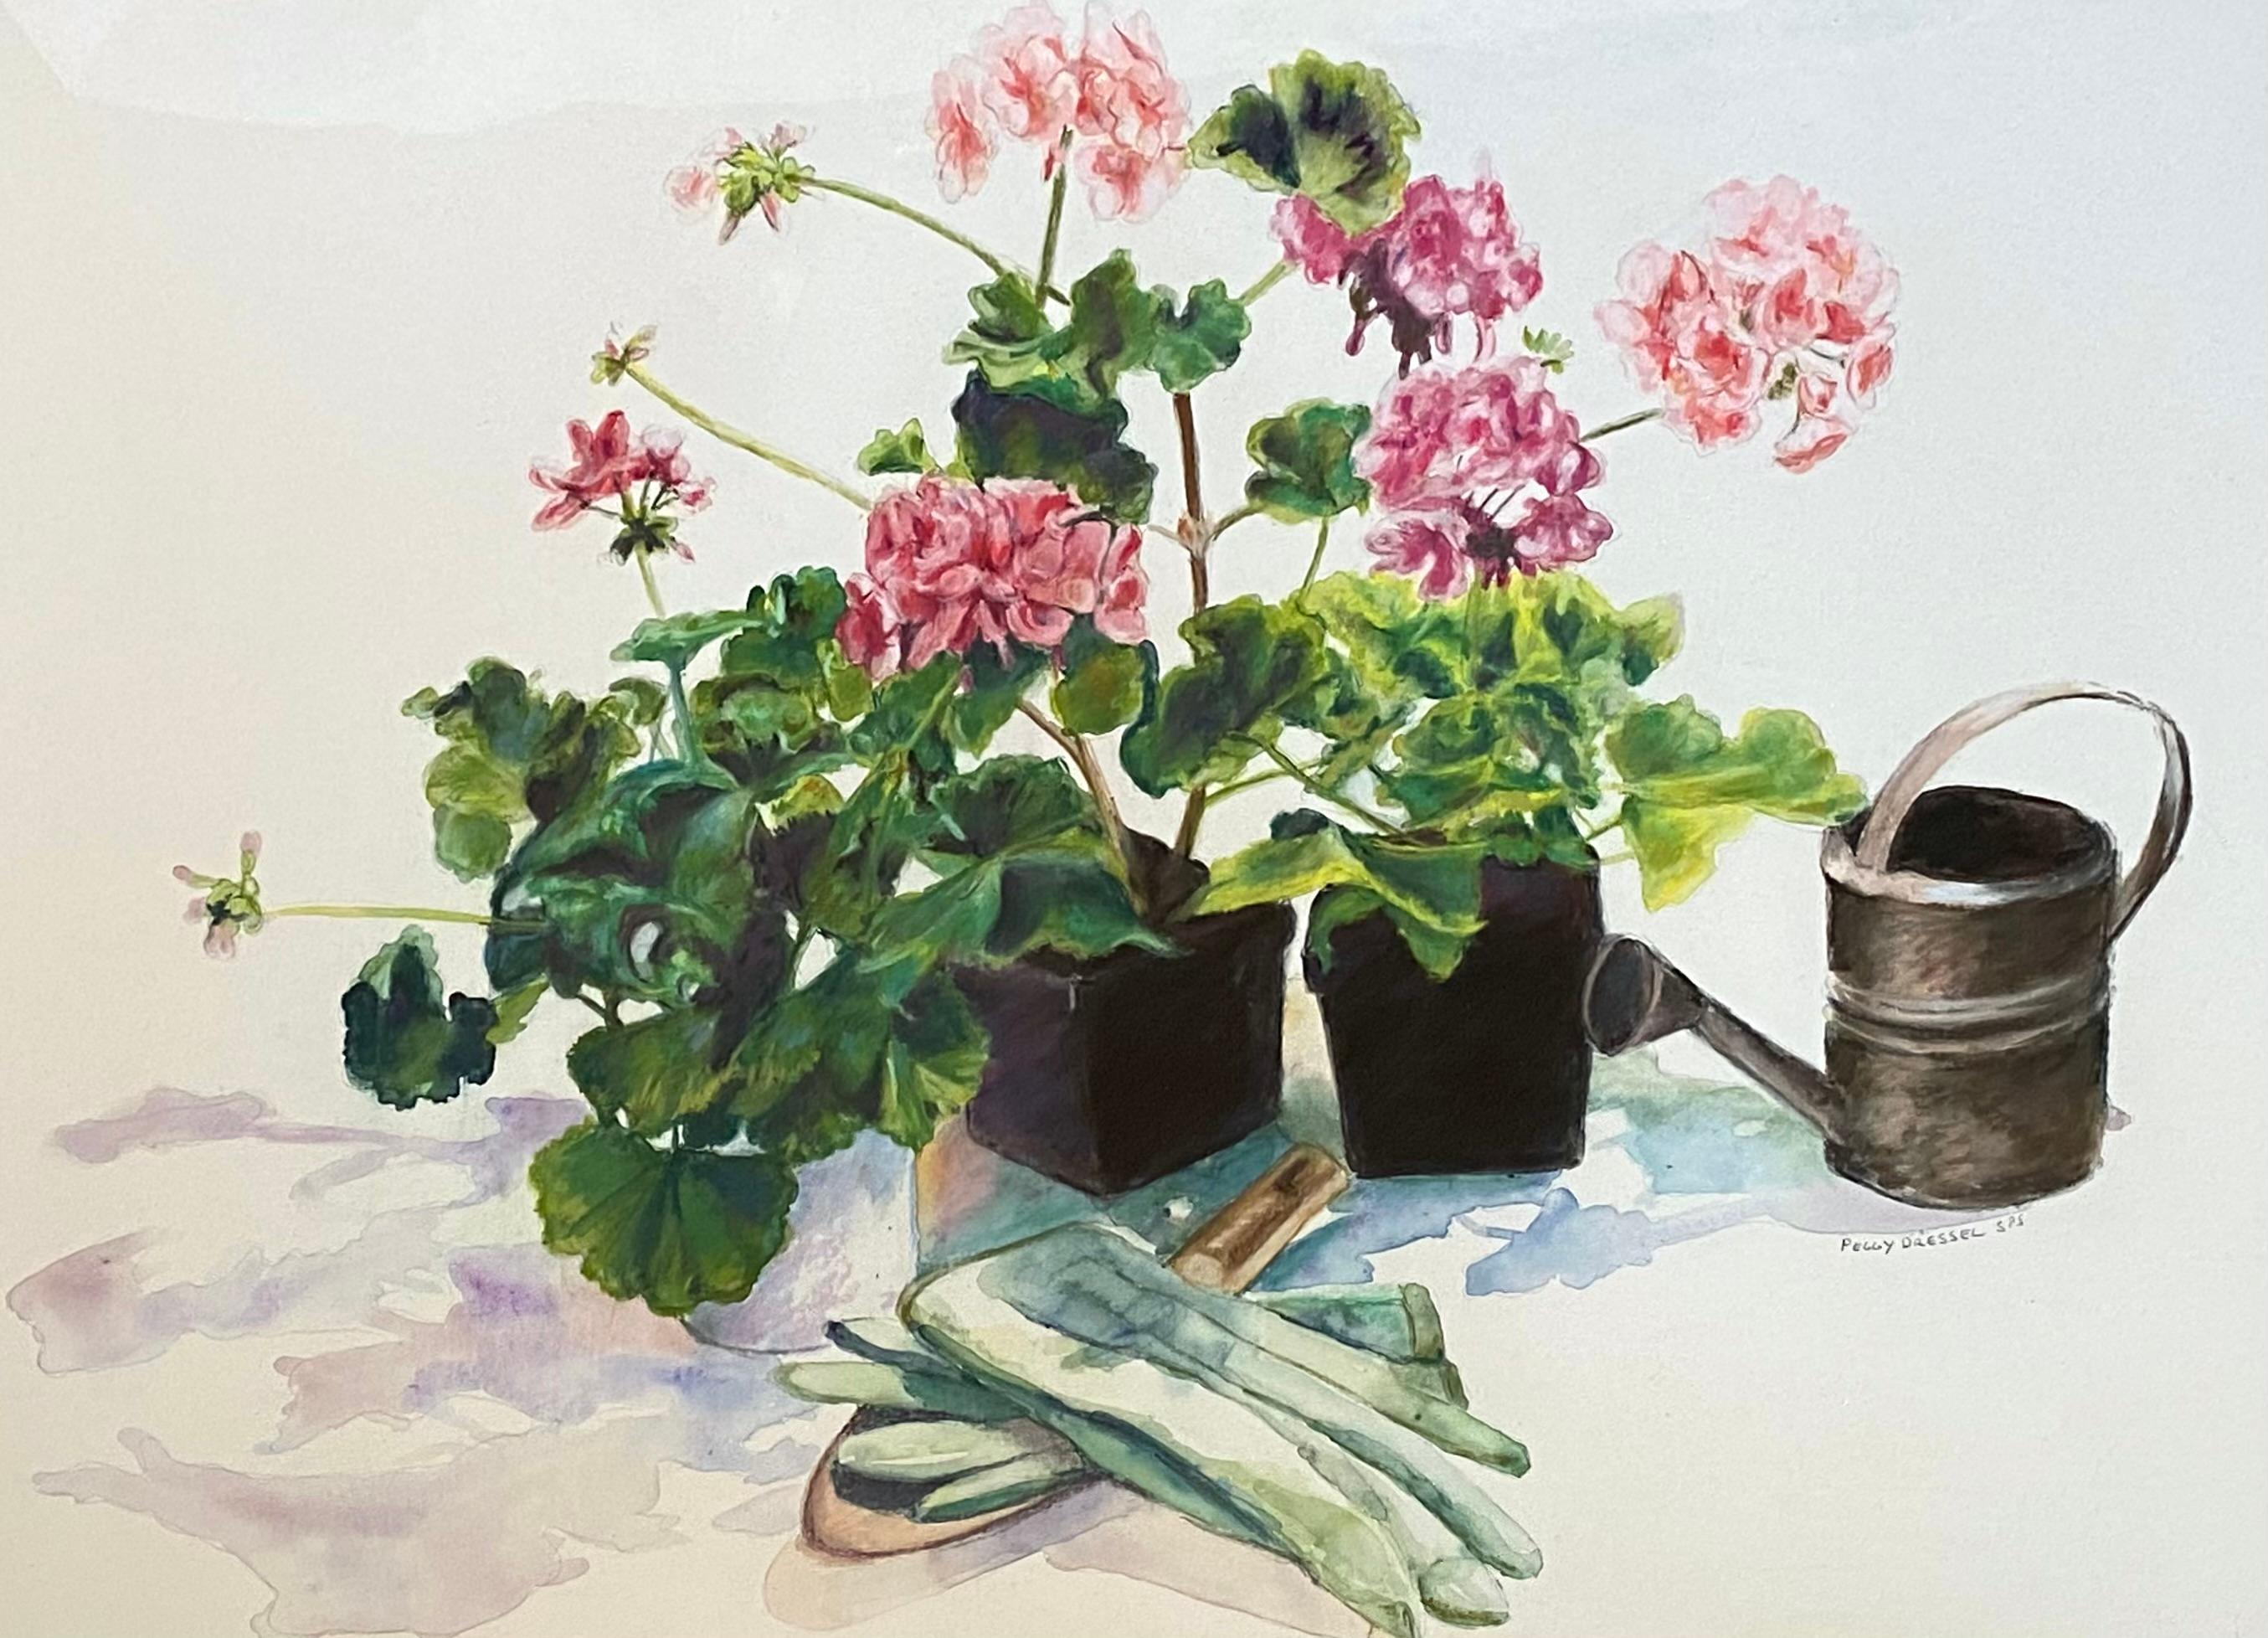 Very well painted original watercolor on archival paper of potted geraniums with metal watering can and garden gloves. Signed in pencil by the artist Peggy Dressel lower right. The S.P.S. after her signature stands for Southeastern Pastel Society of